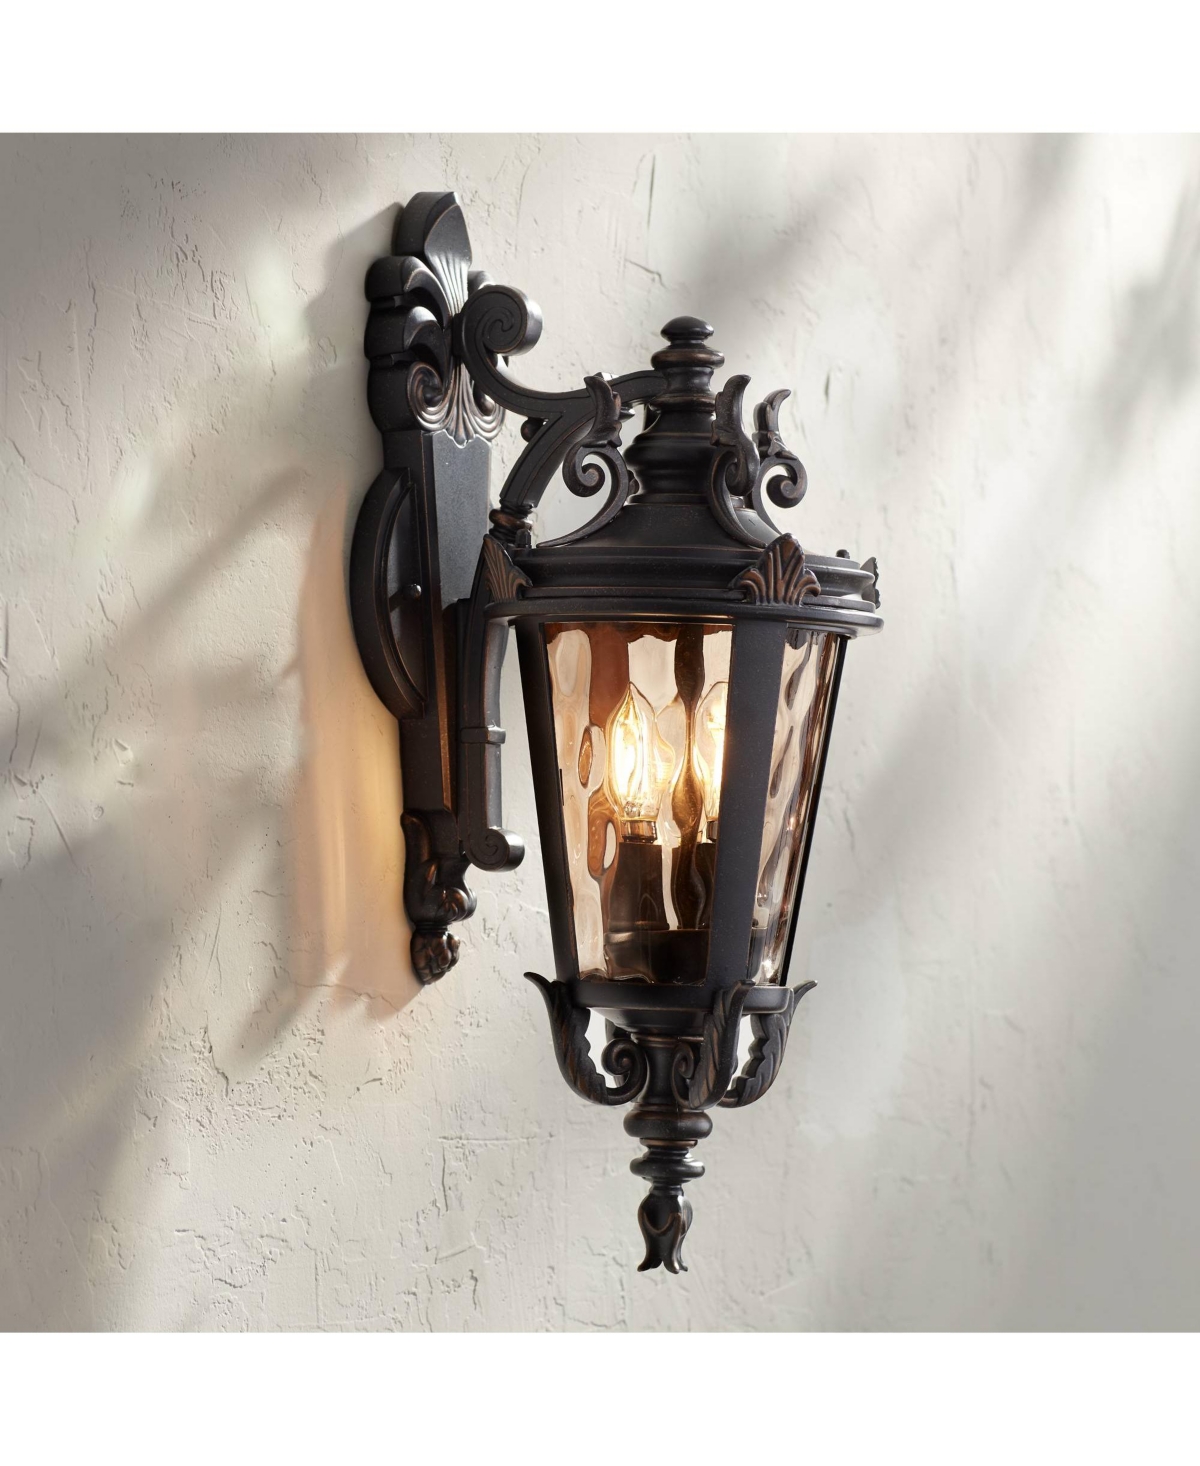 Casa Marseille European Outdoor Wall Light Fixture Bronze Scroll 21 3/4" Champagne Hammered Glass for Exterior House Porch Patio Outside Deck Garage F